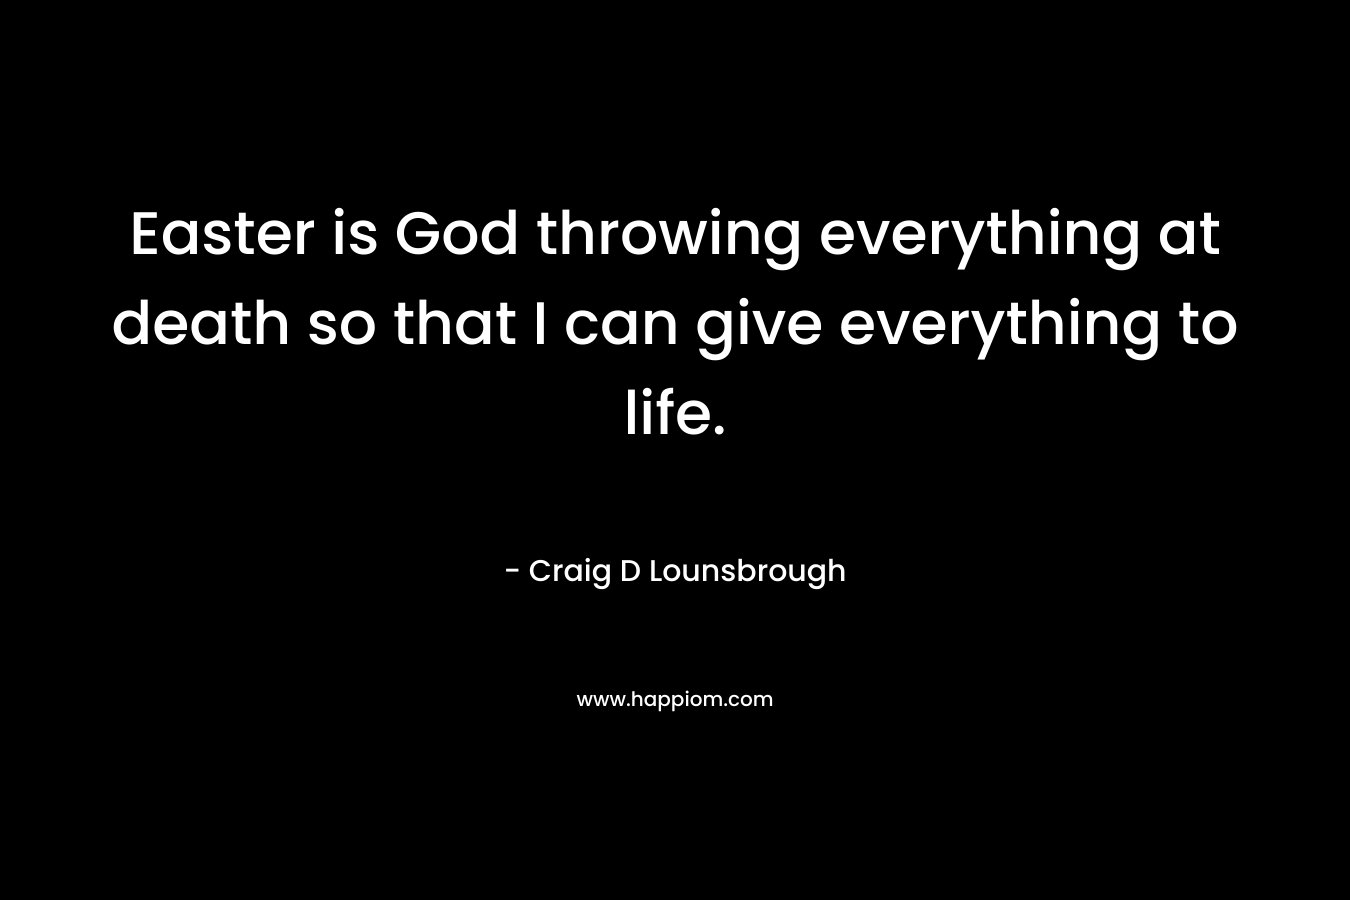 Easter is God throwing everything at death so that I can give everything to life. – Craig D Lounsbrough